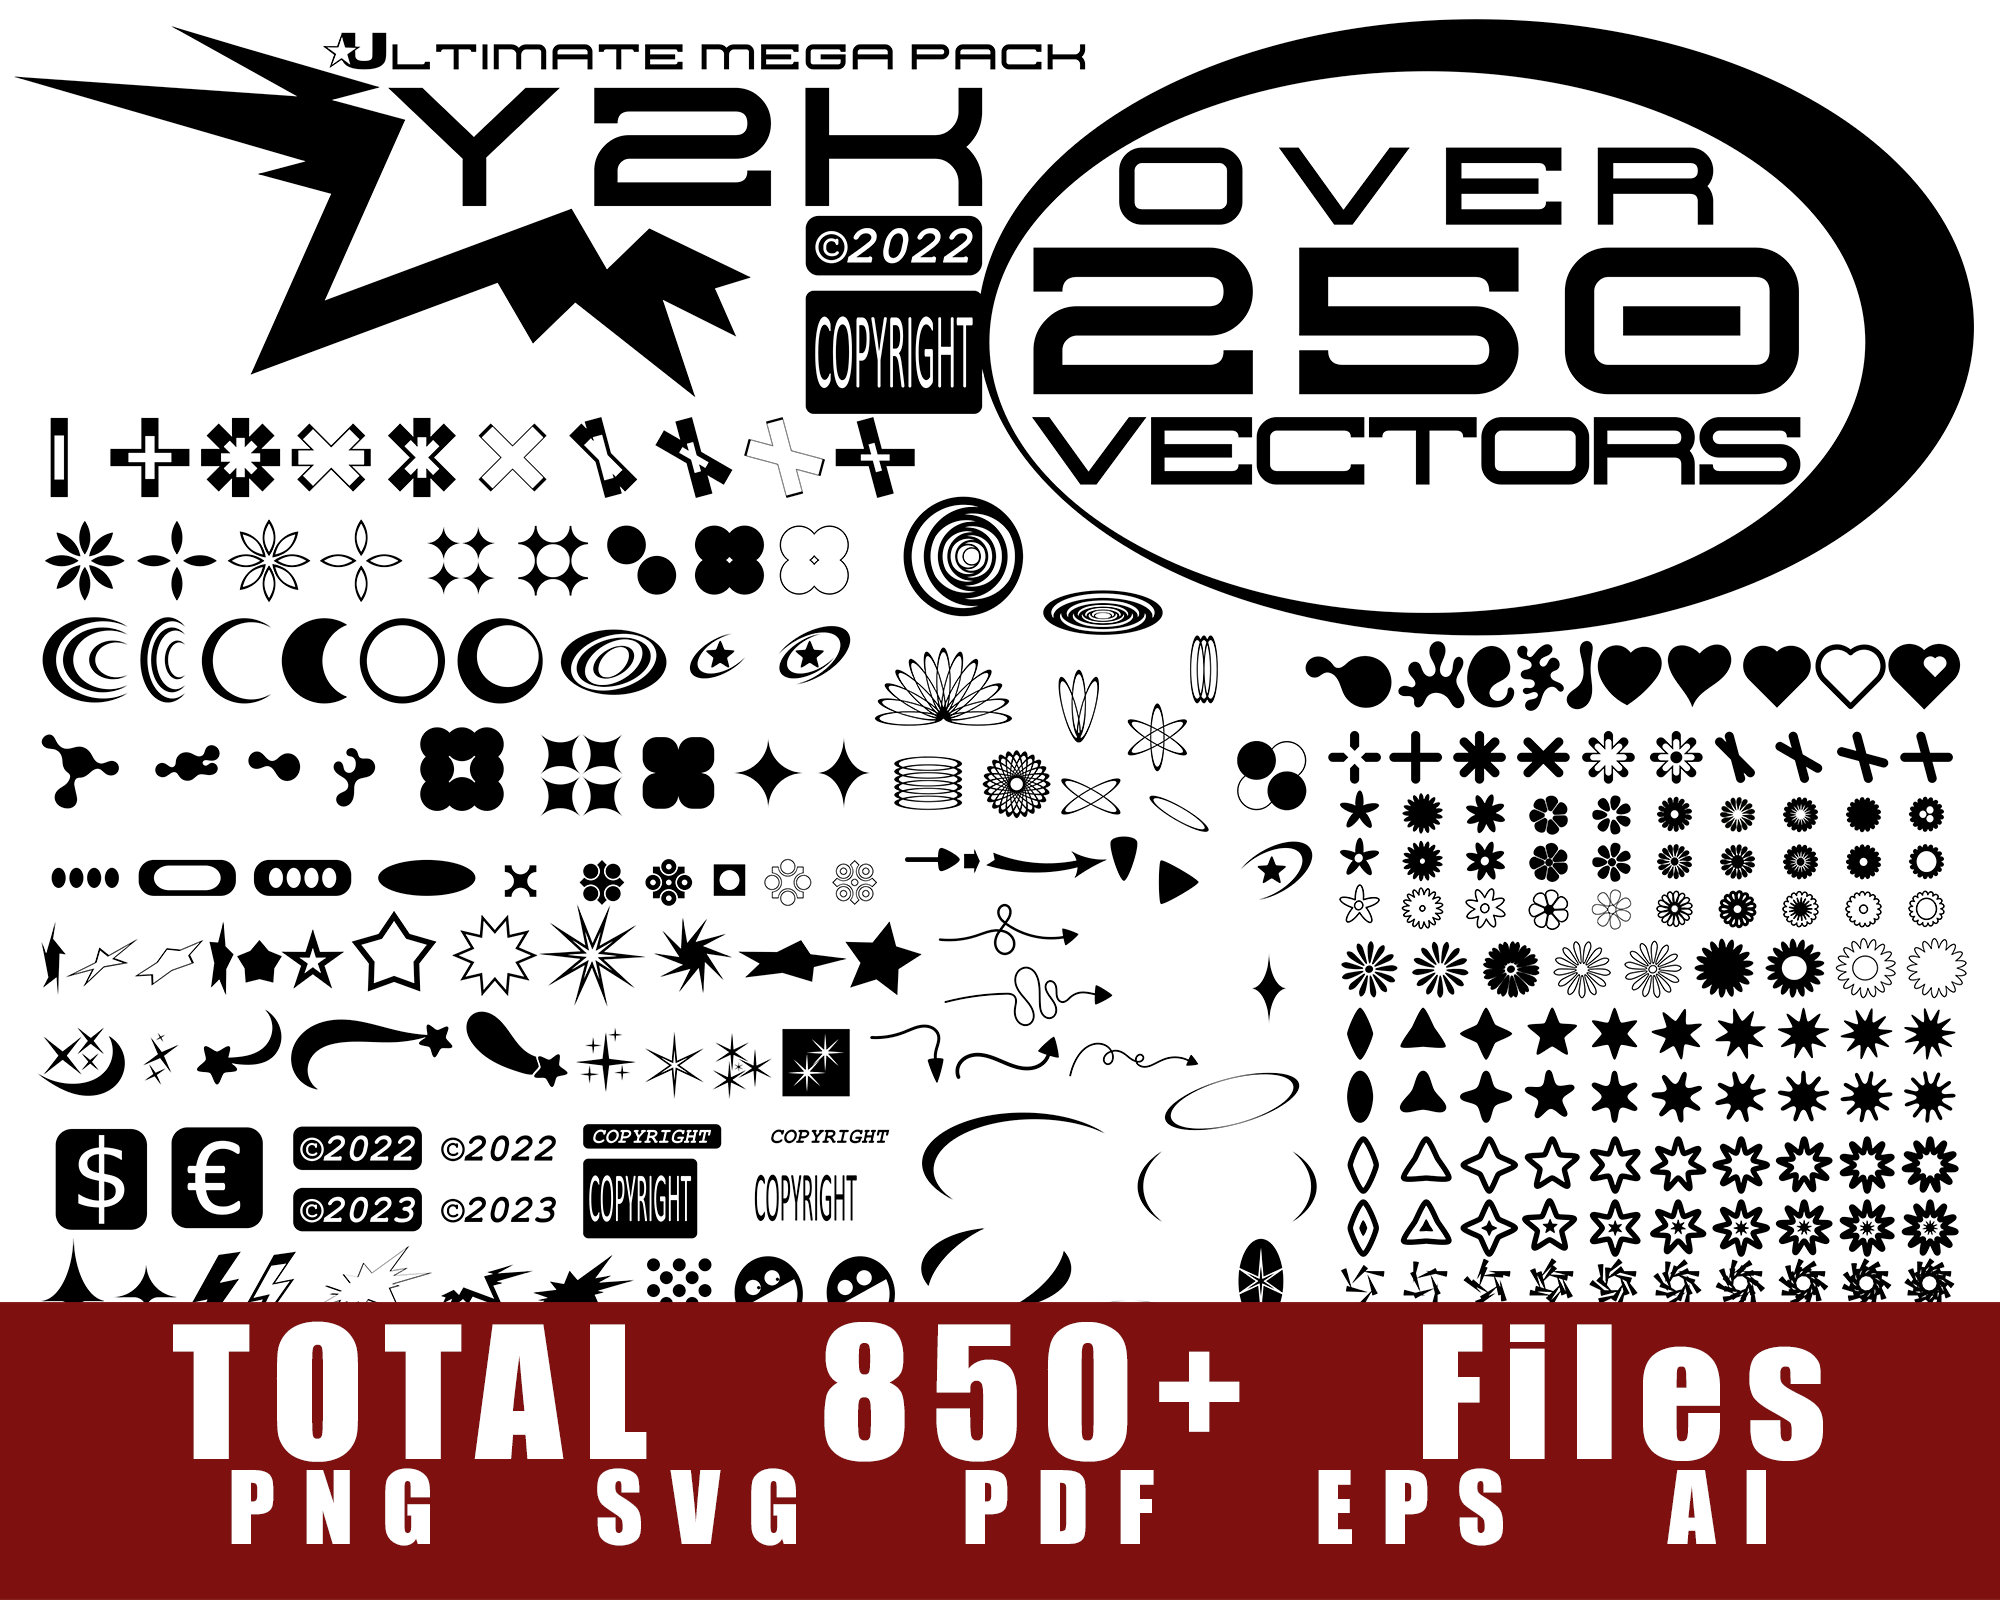 Y2K Aesthetic Icons Template over 80 Assets for Logos, Clothing